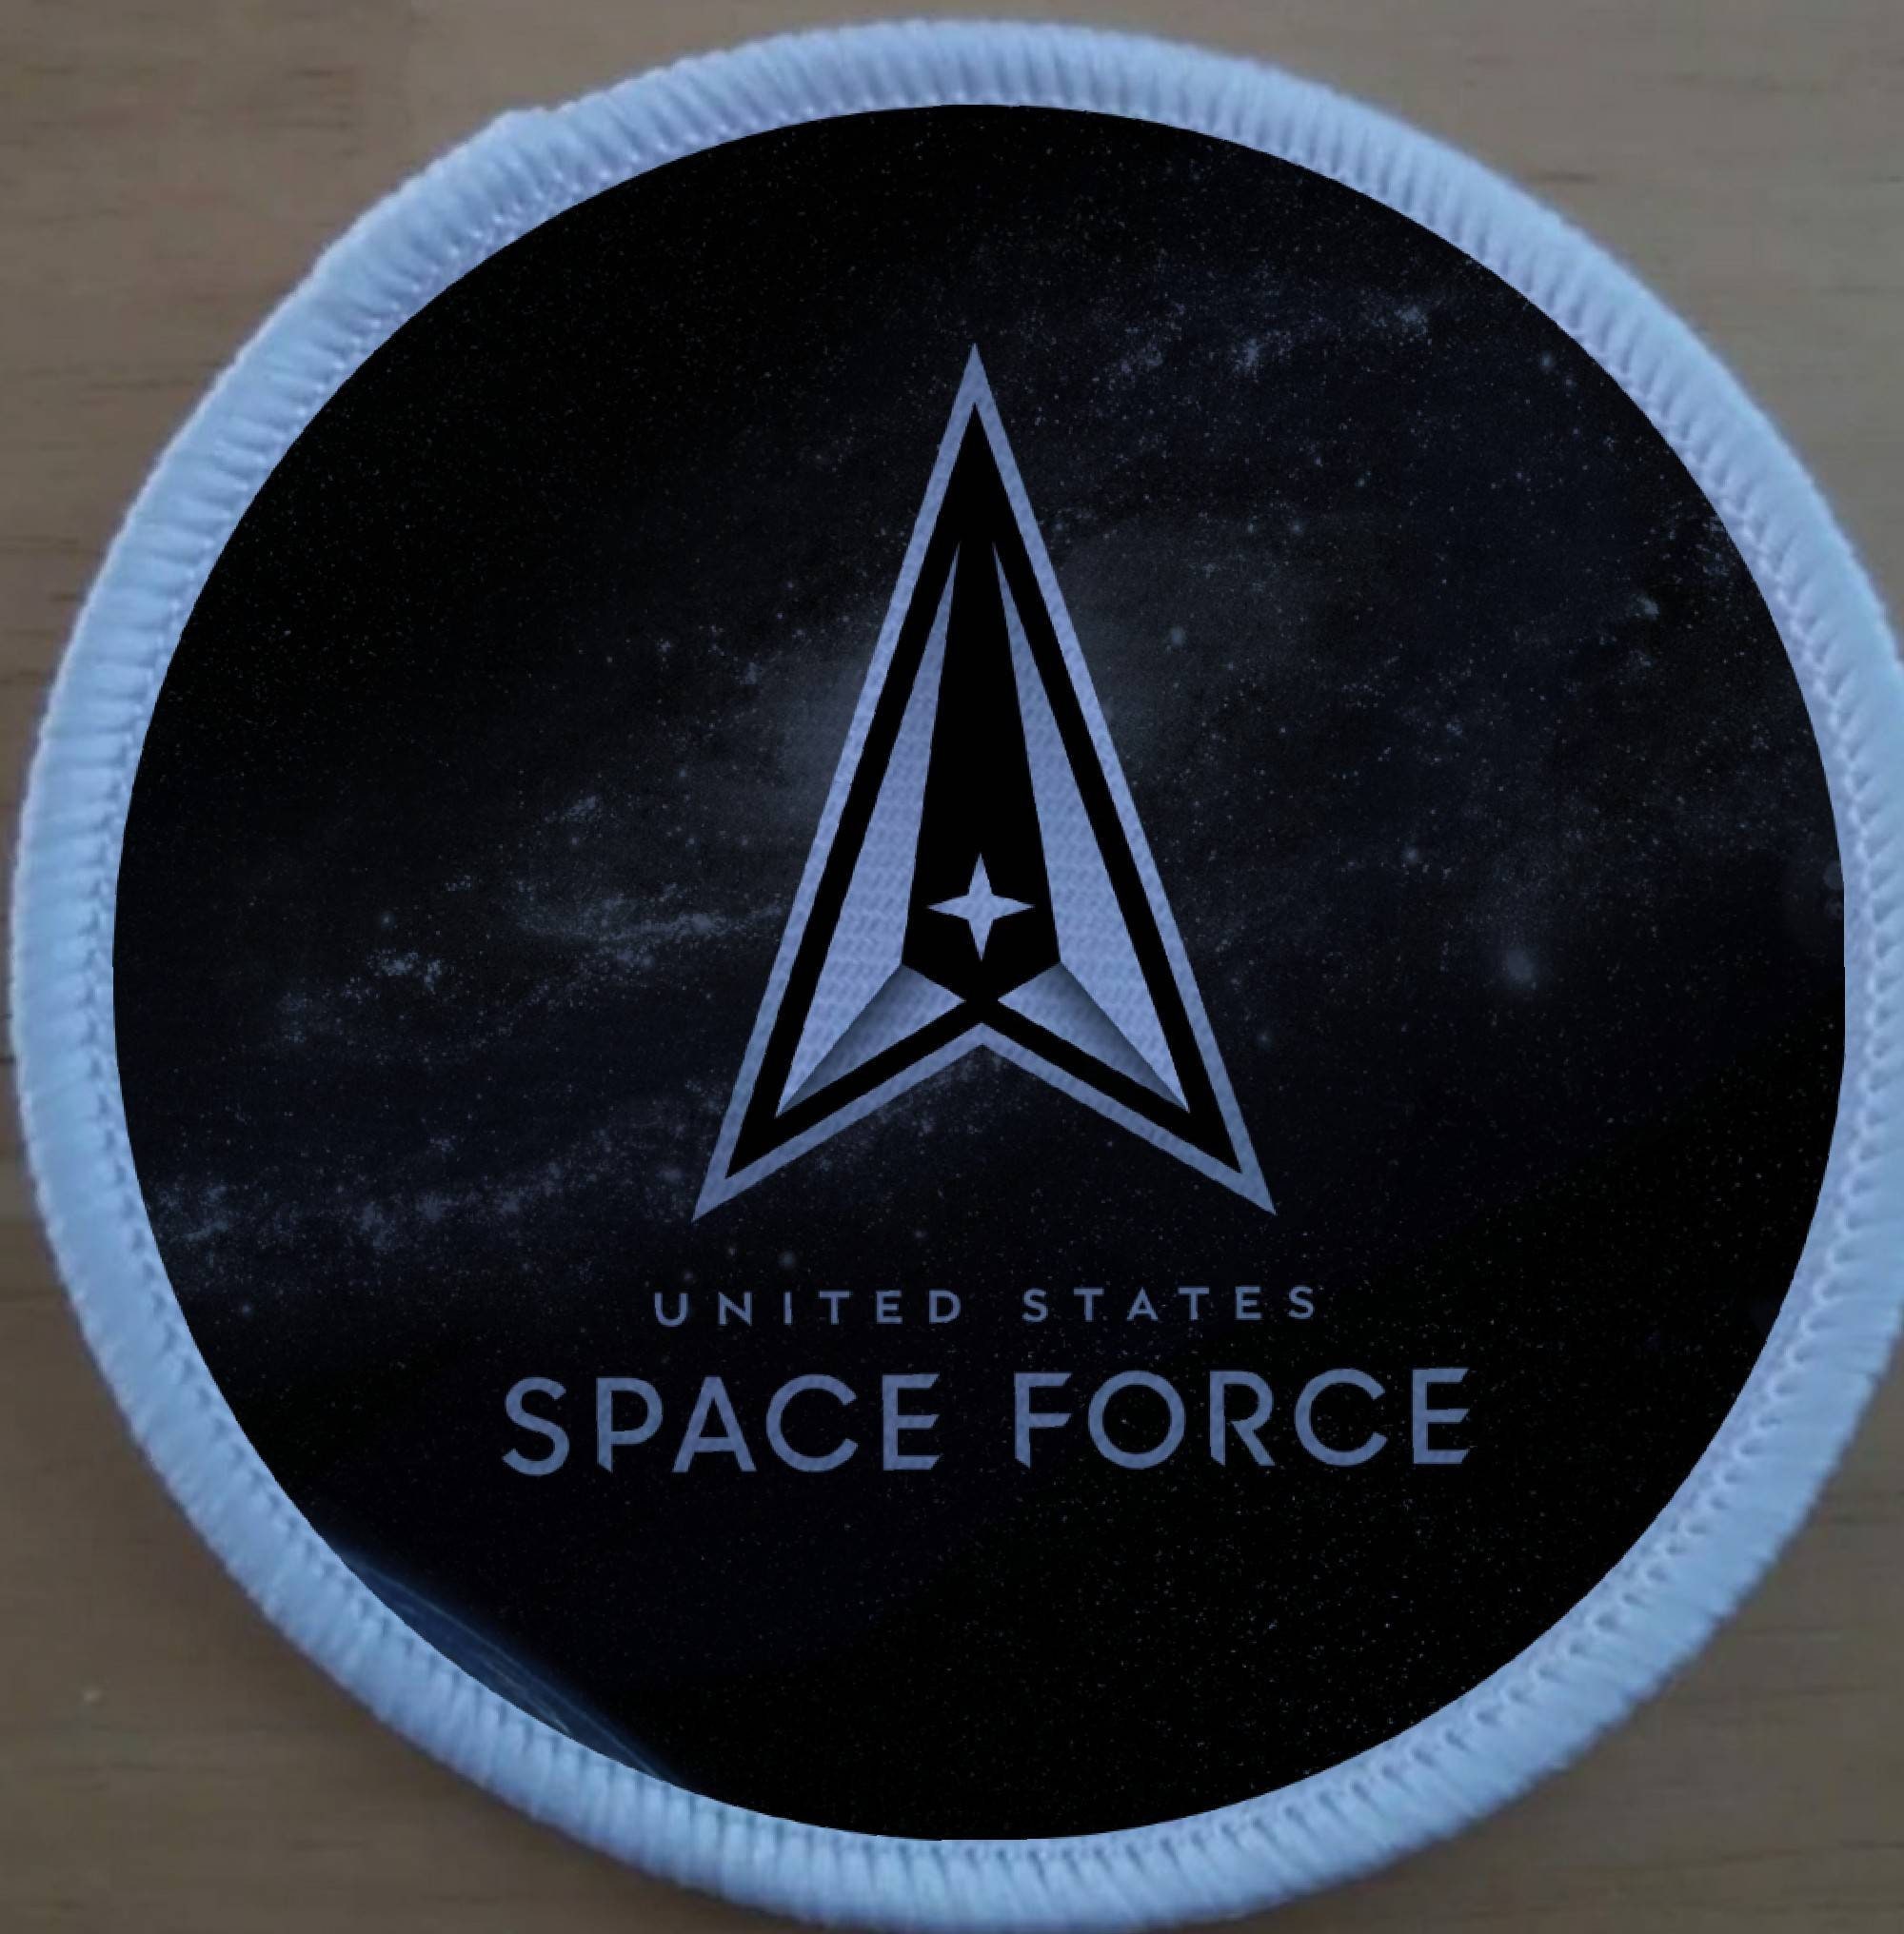 United States Space Force sublimation patch badge | Etsy